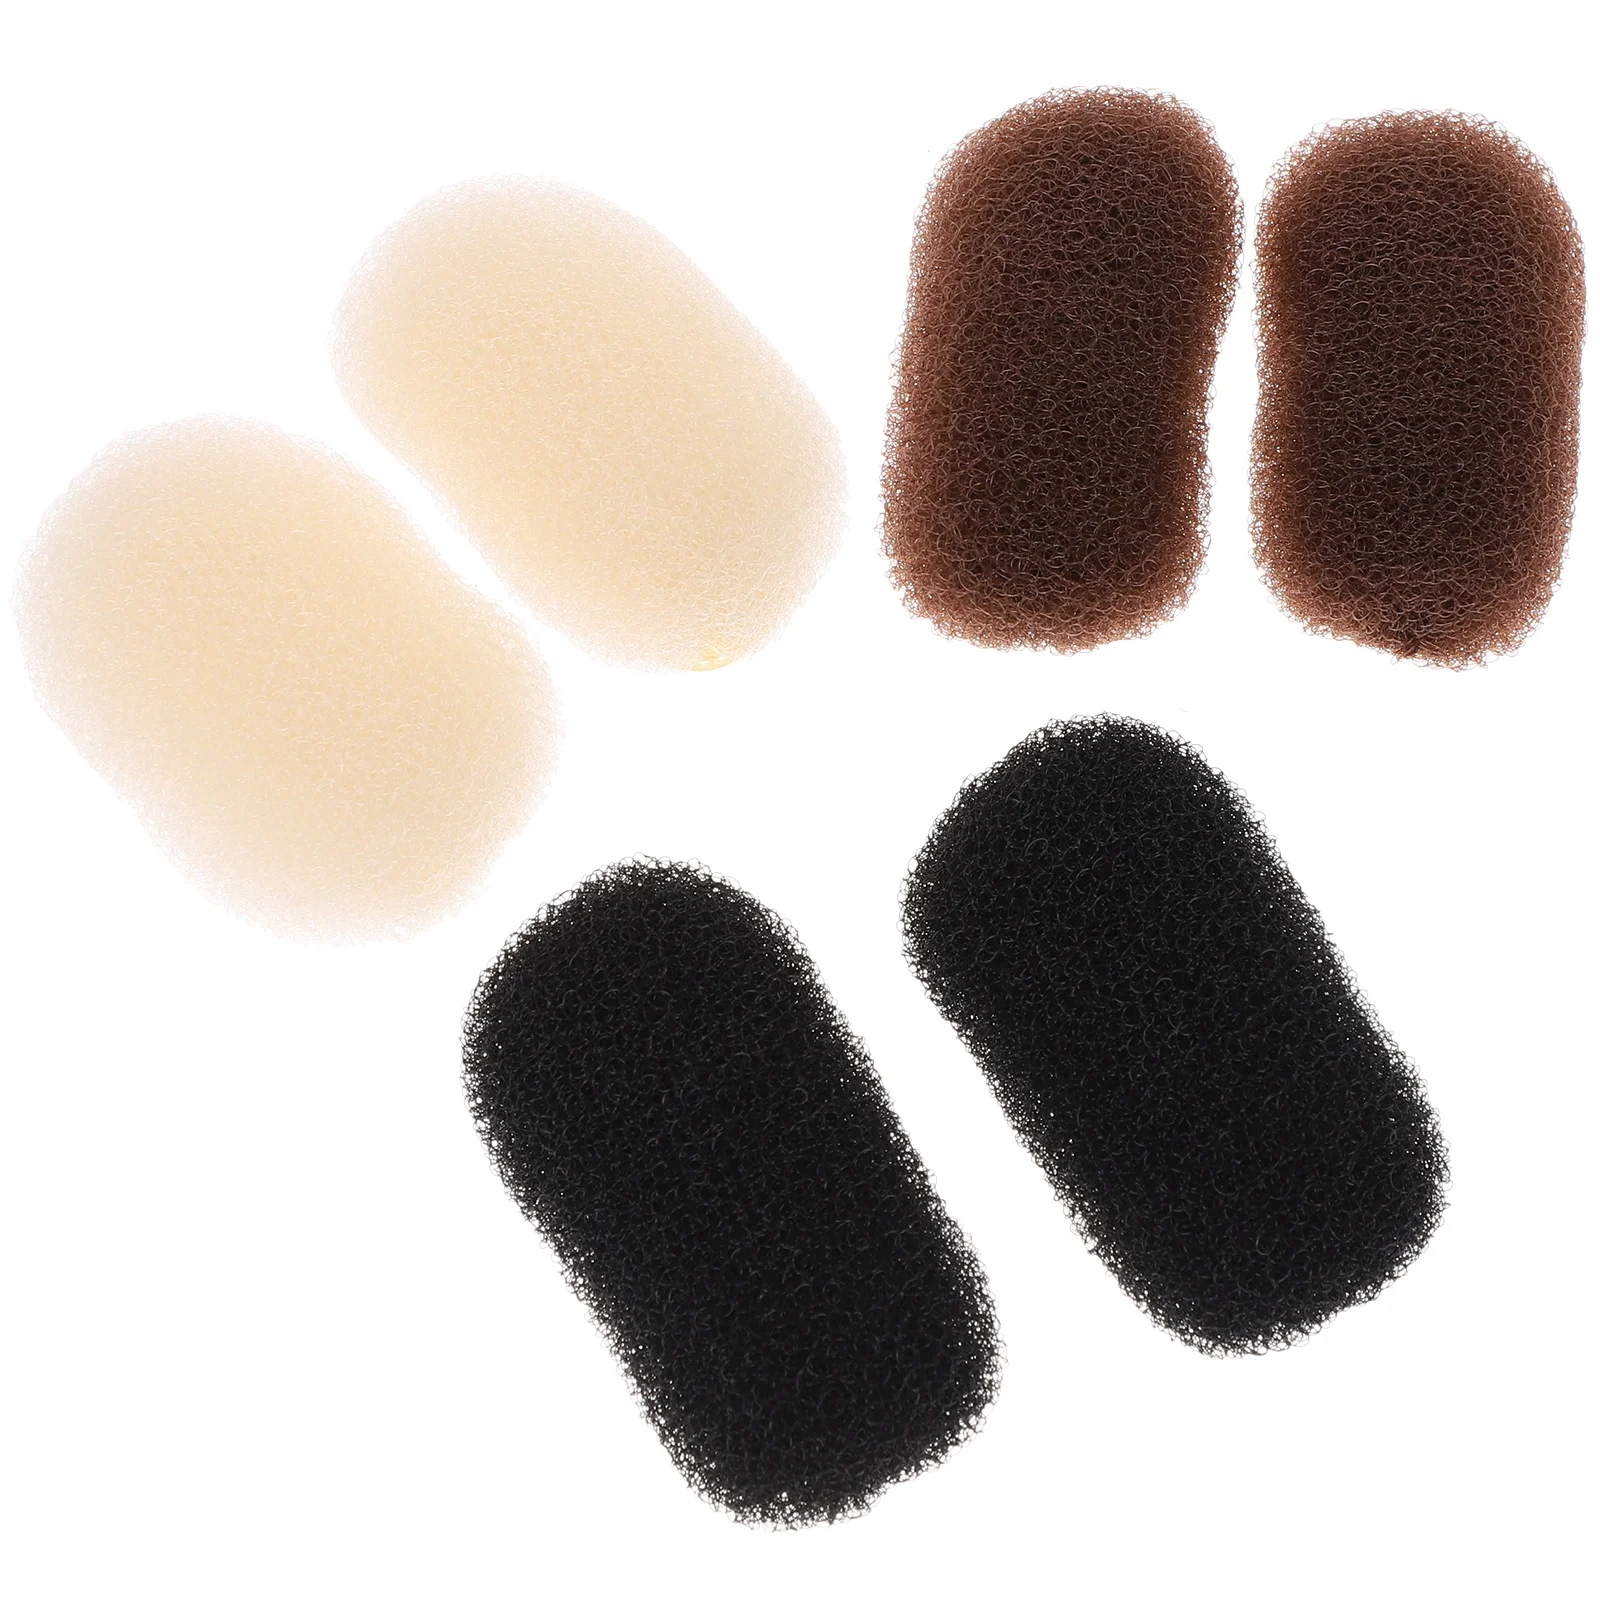 

6 Pcs Hair Volume Clips Roots Sponge Bag Pad Padding Accessory Head Heighten Clamp Girl Steel Hairpin Increase Holding